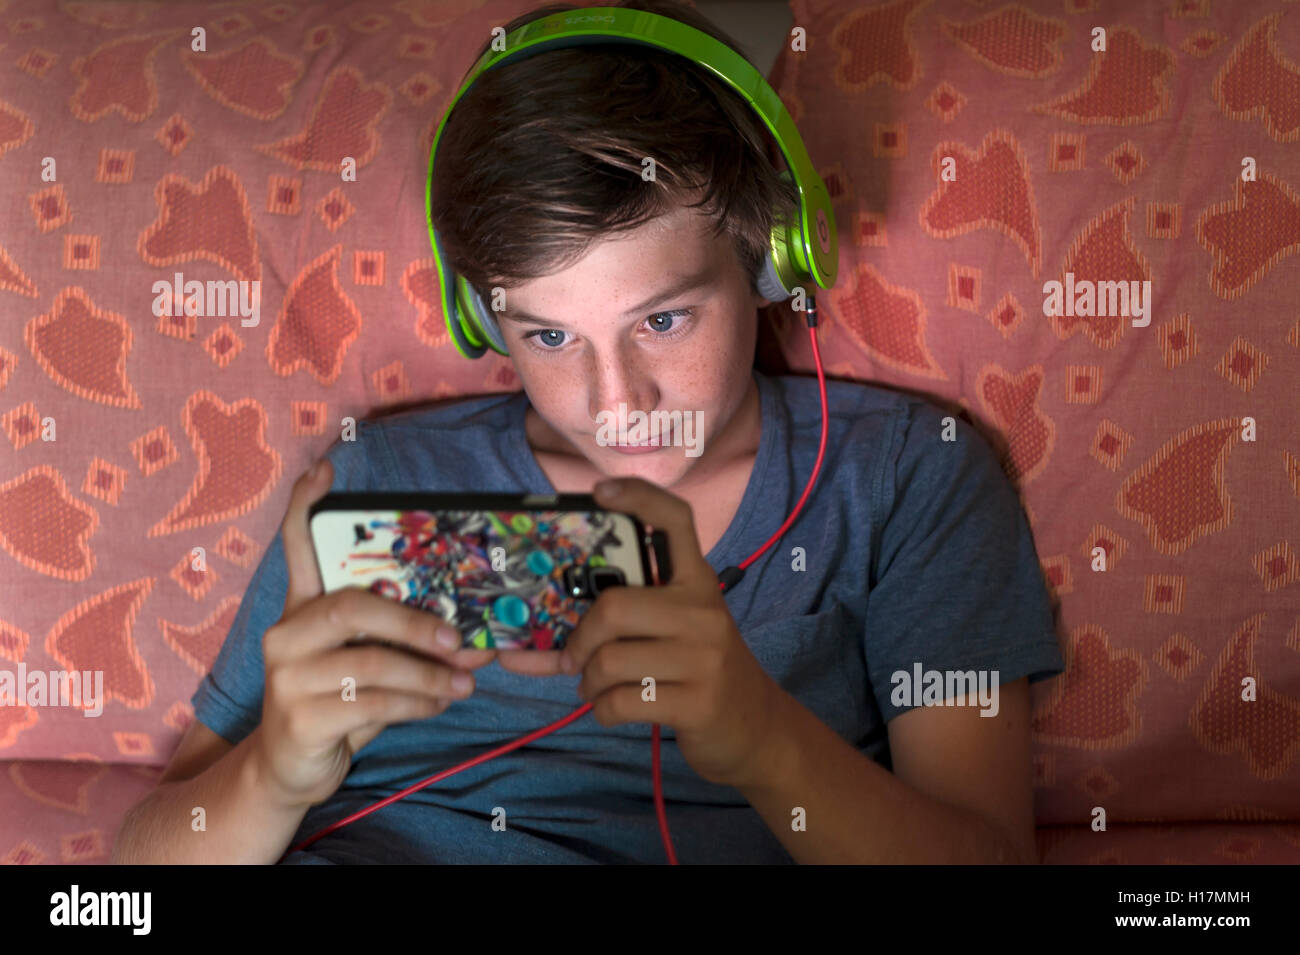 Boy, 12 years old, listening to music with headphones on a smartphone, Germany Stock Photo